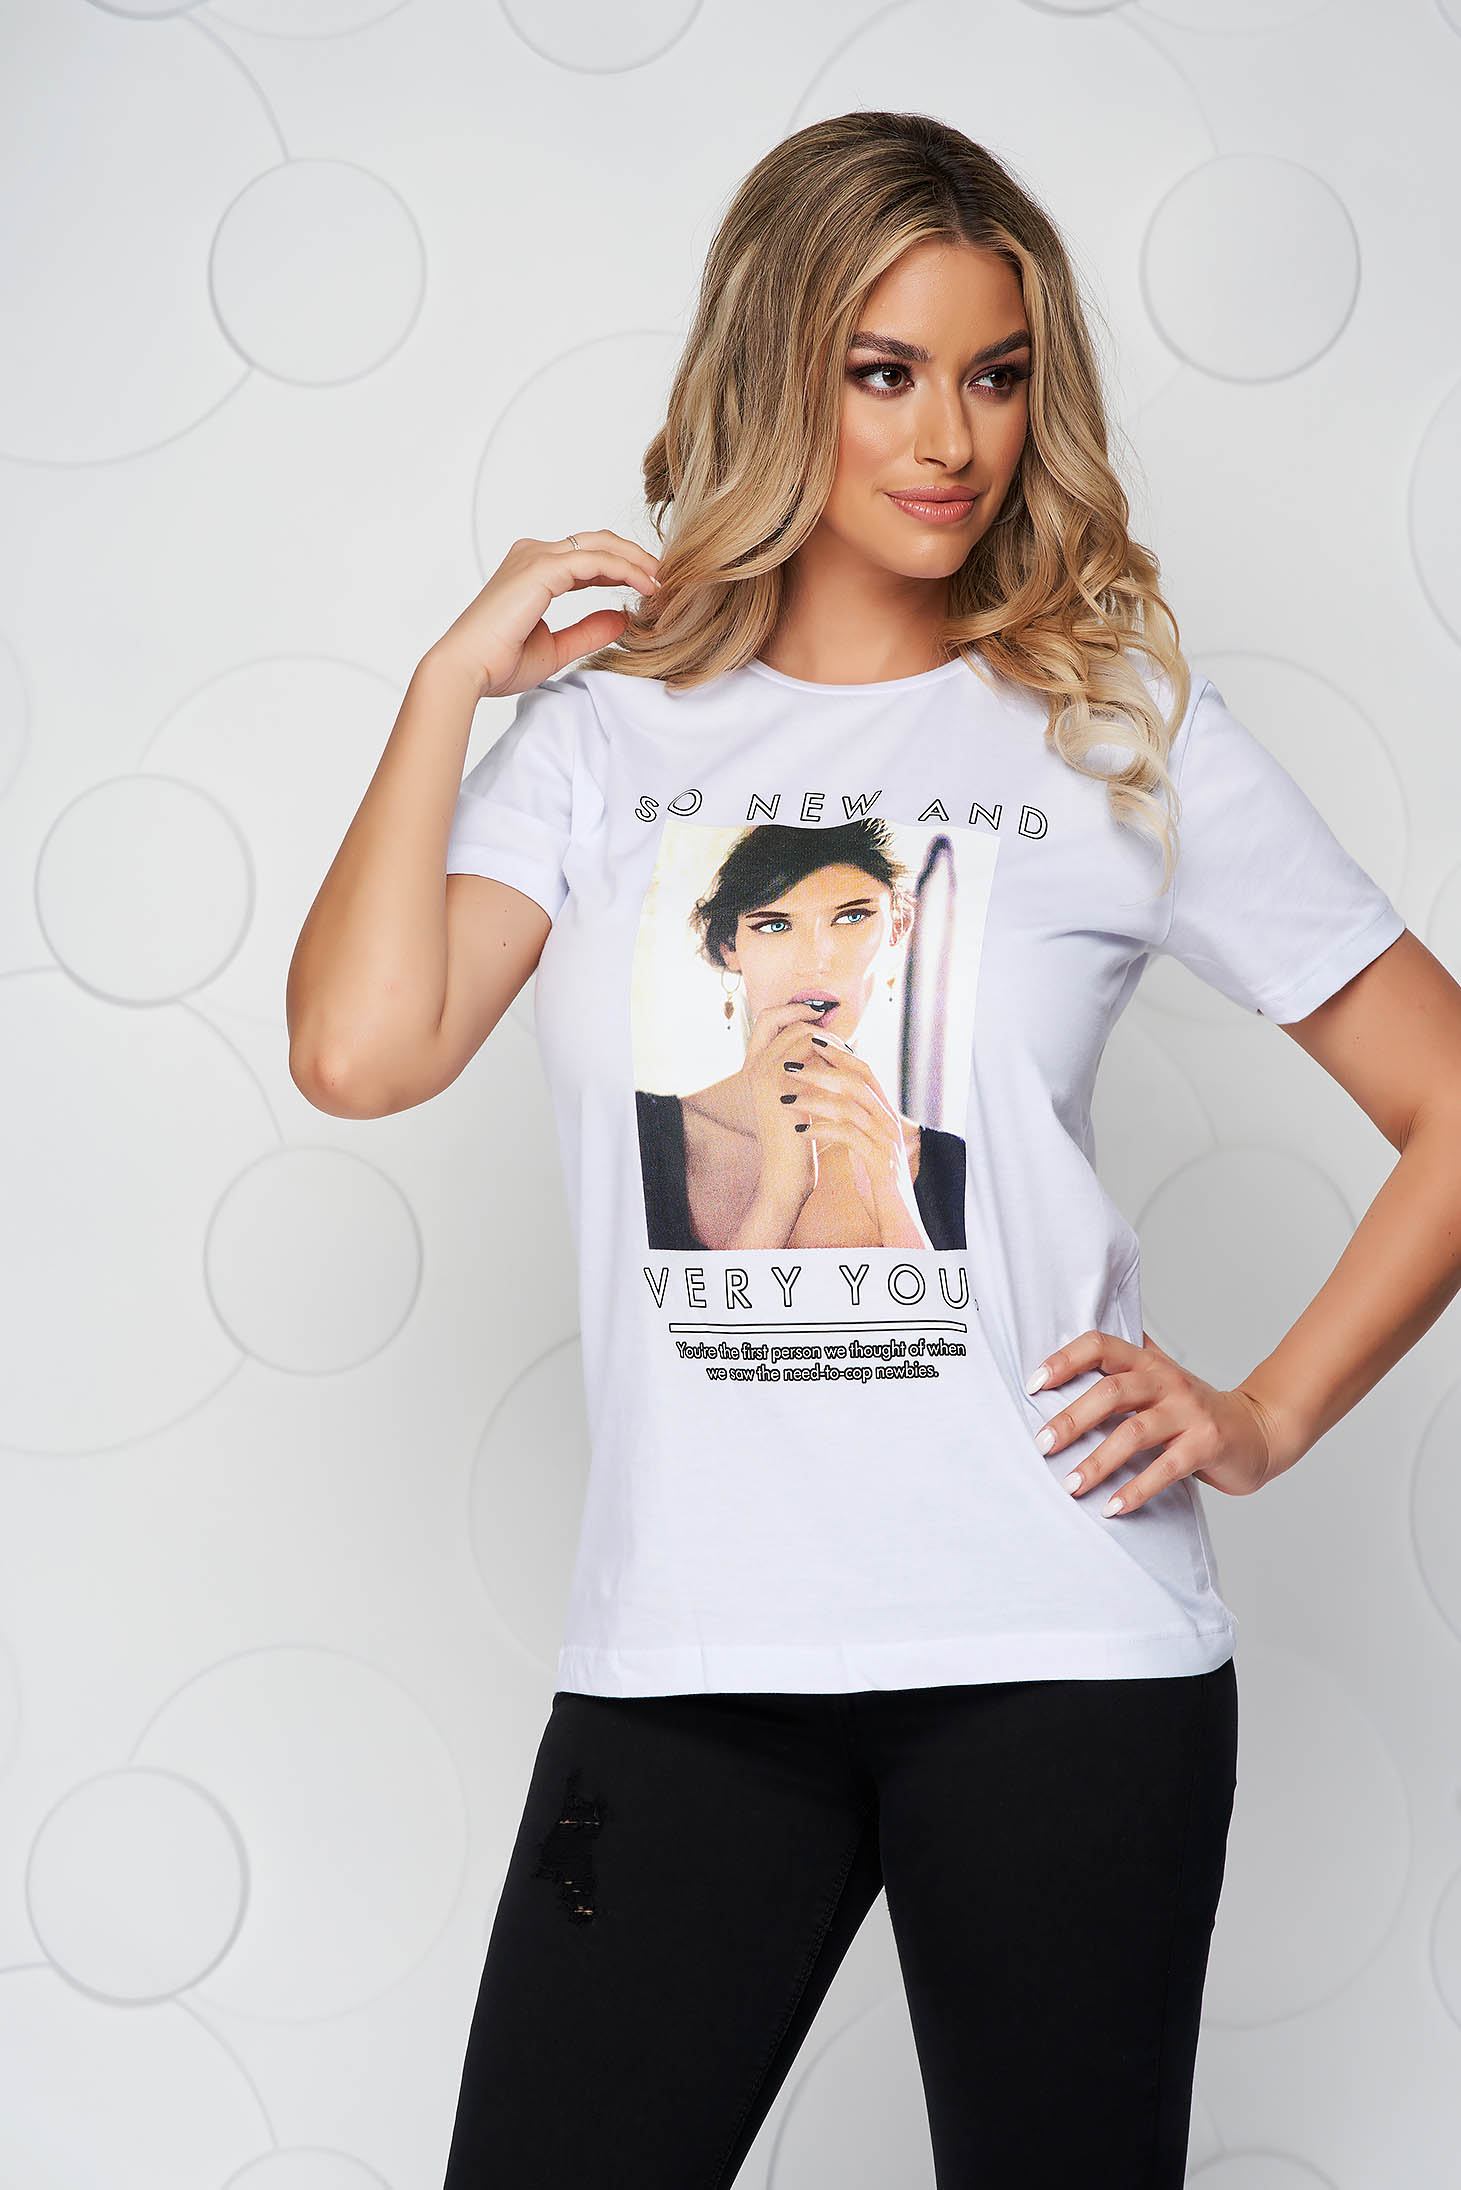 White t-shirt cotton loose fit with rounded cleavage with graphic details